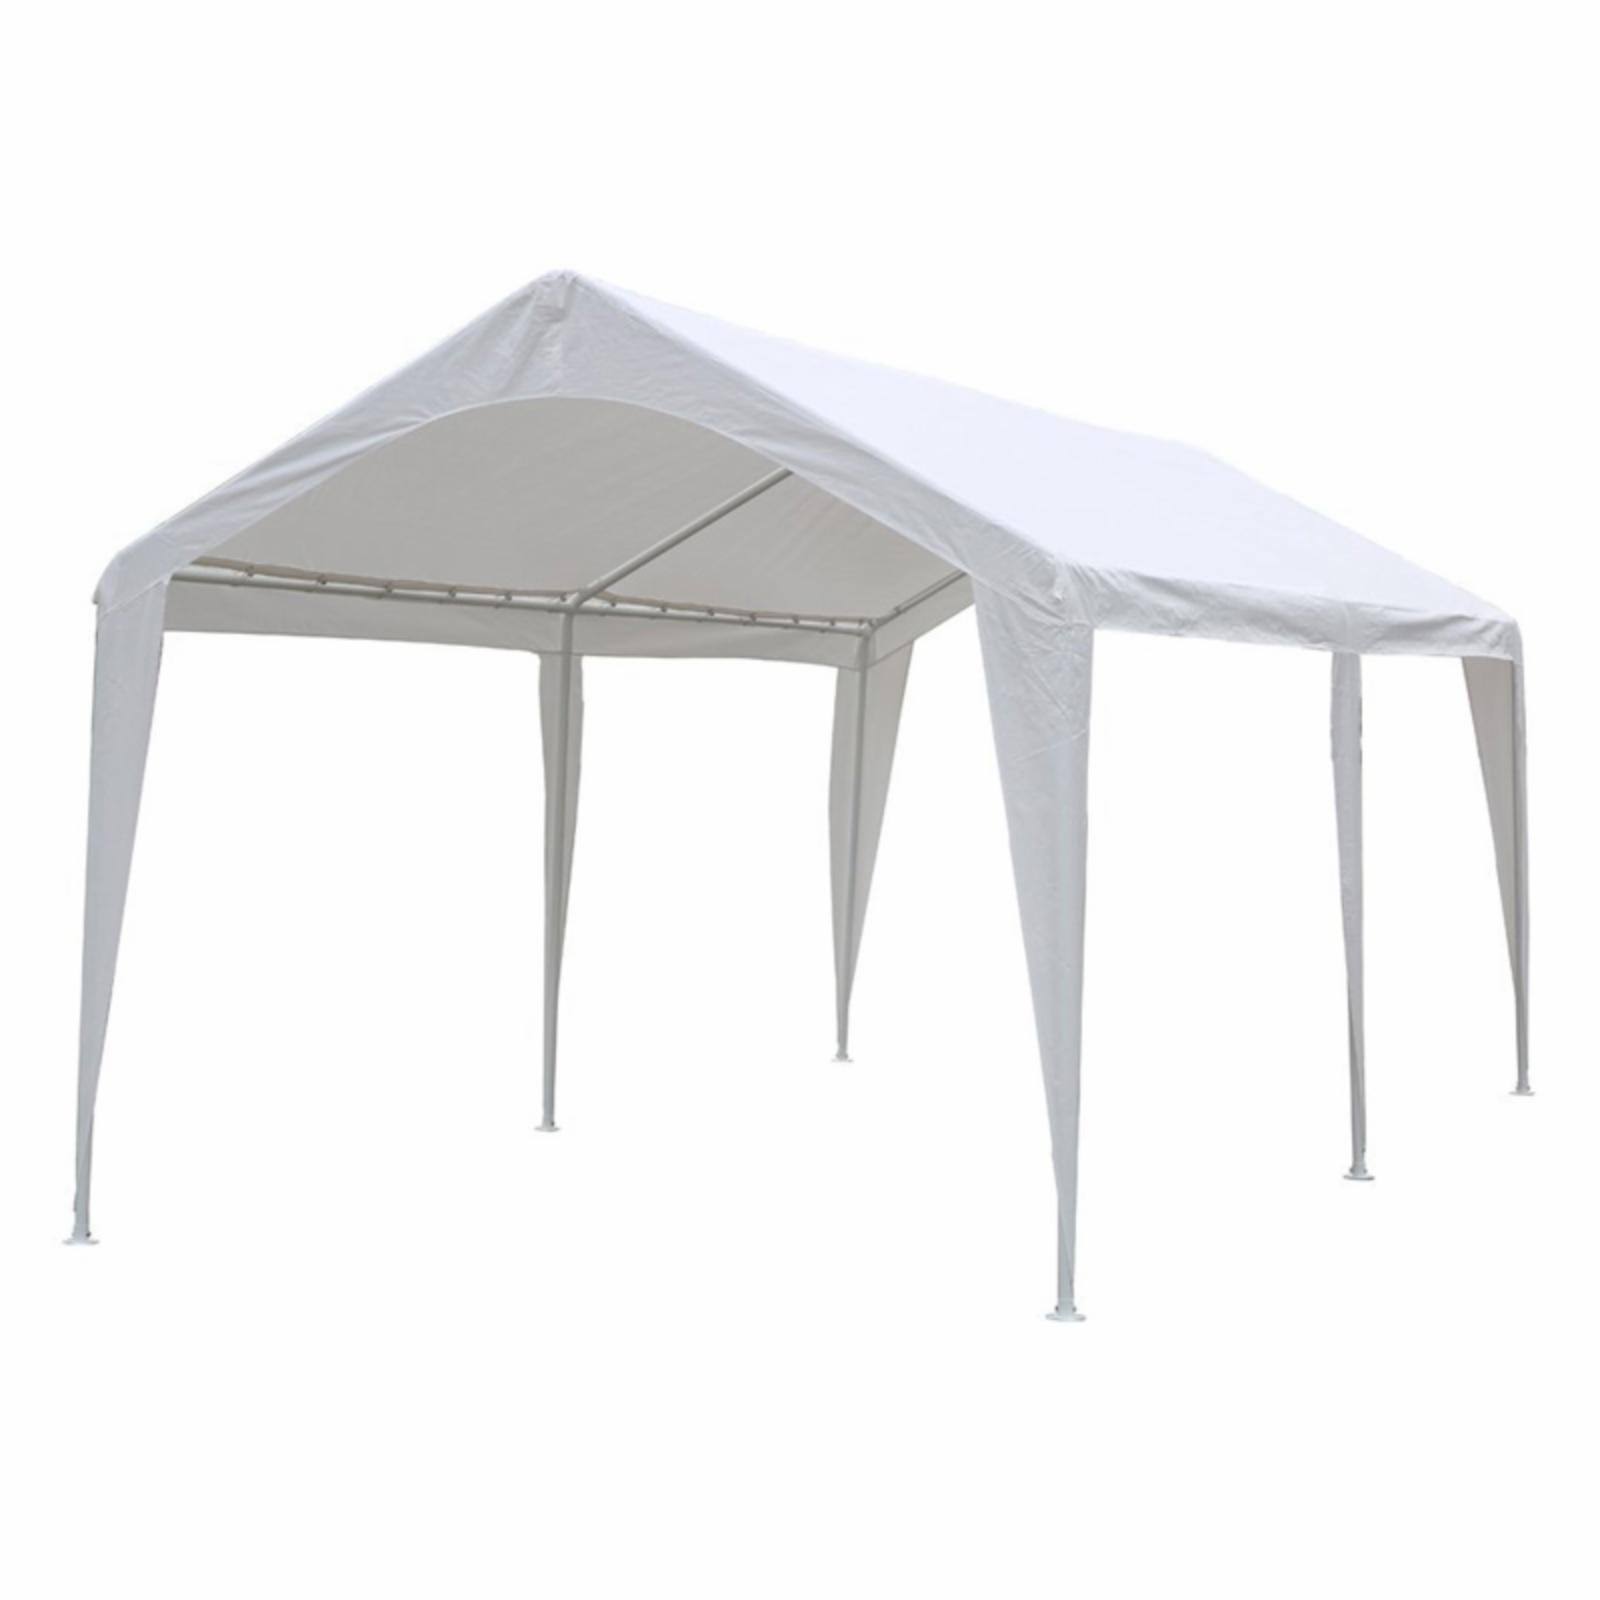 Abba Patio 10 x 20-Feet Outdoor Carport Canopy with 6 Steel Legs, White ...